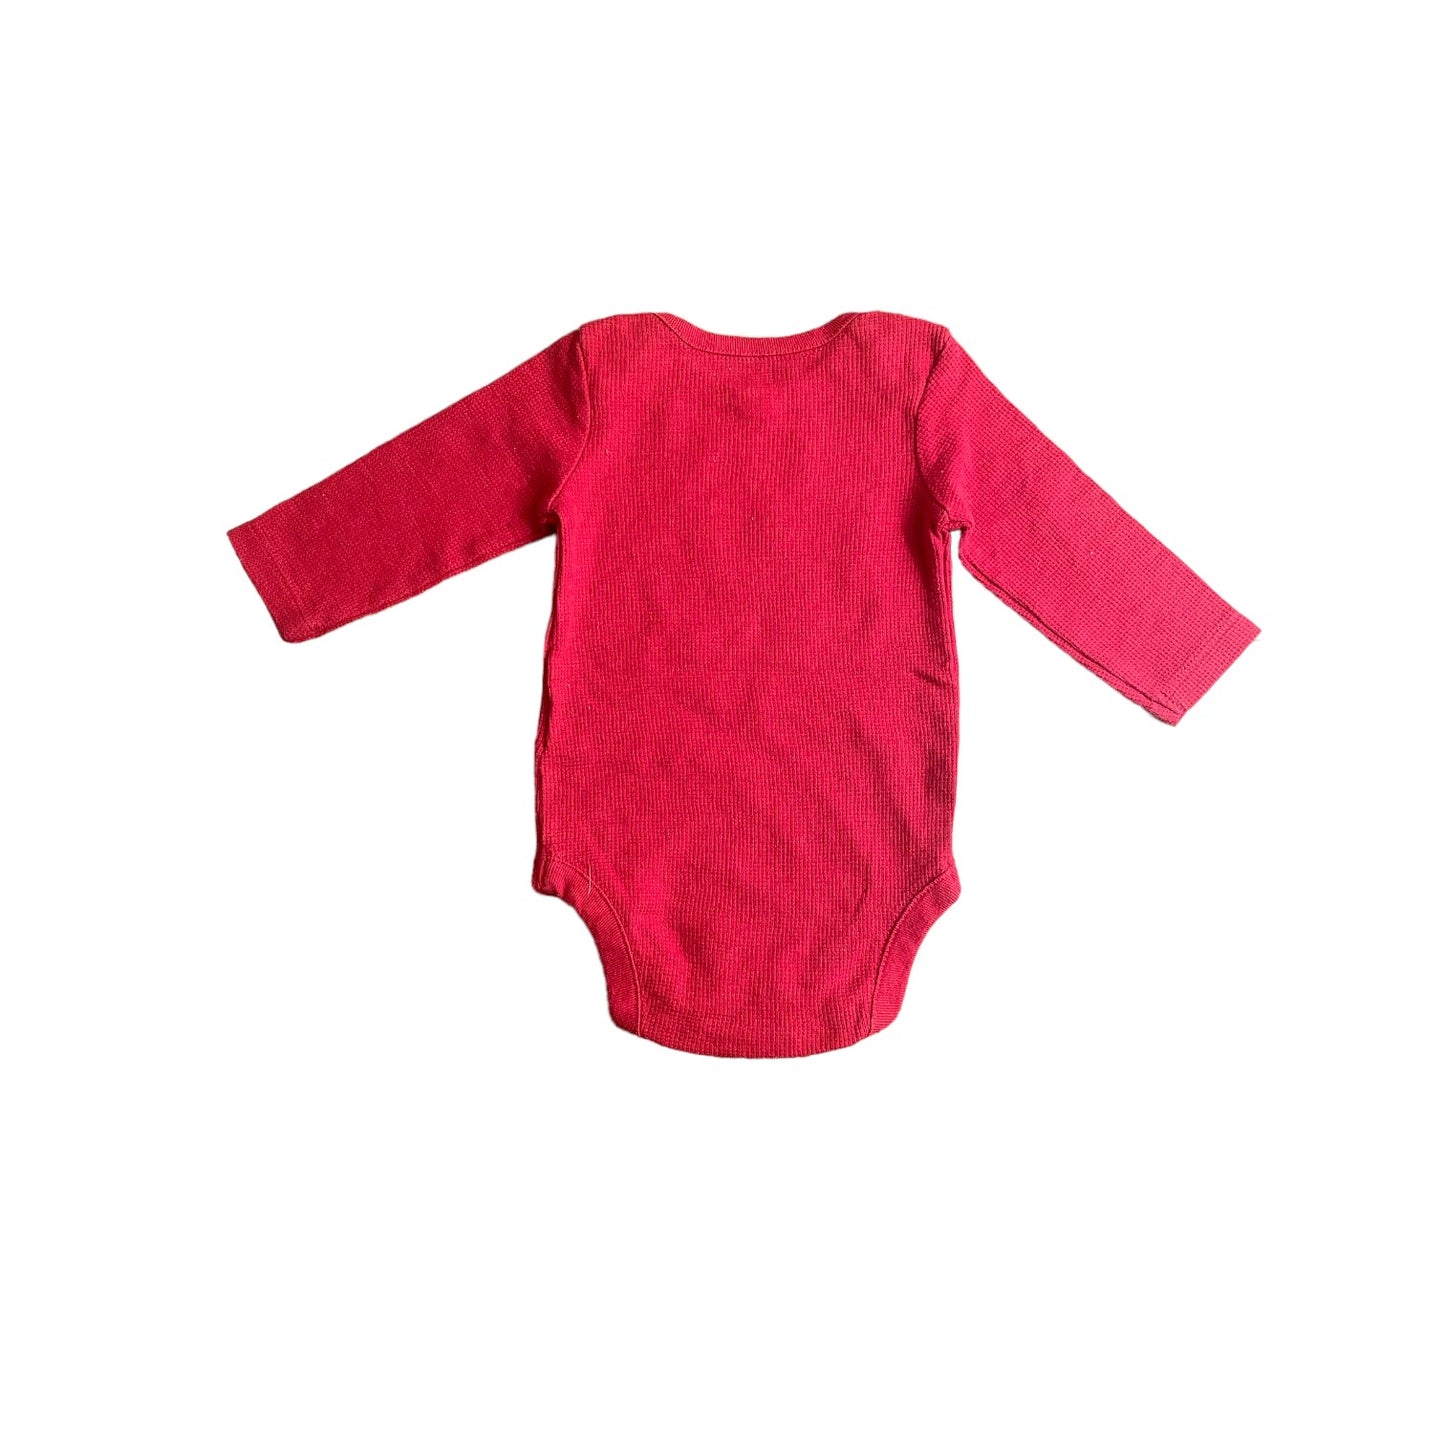 Children's Place Knit Thermal Onesie Long Sleeve 0-3 Months